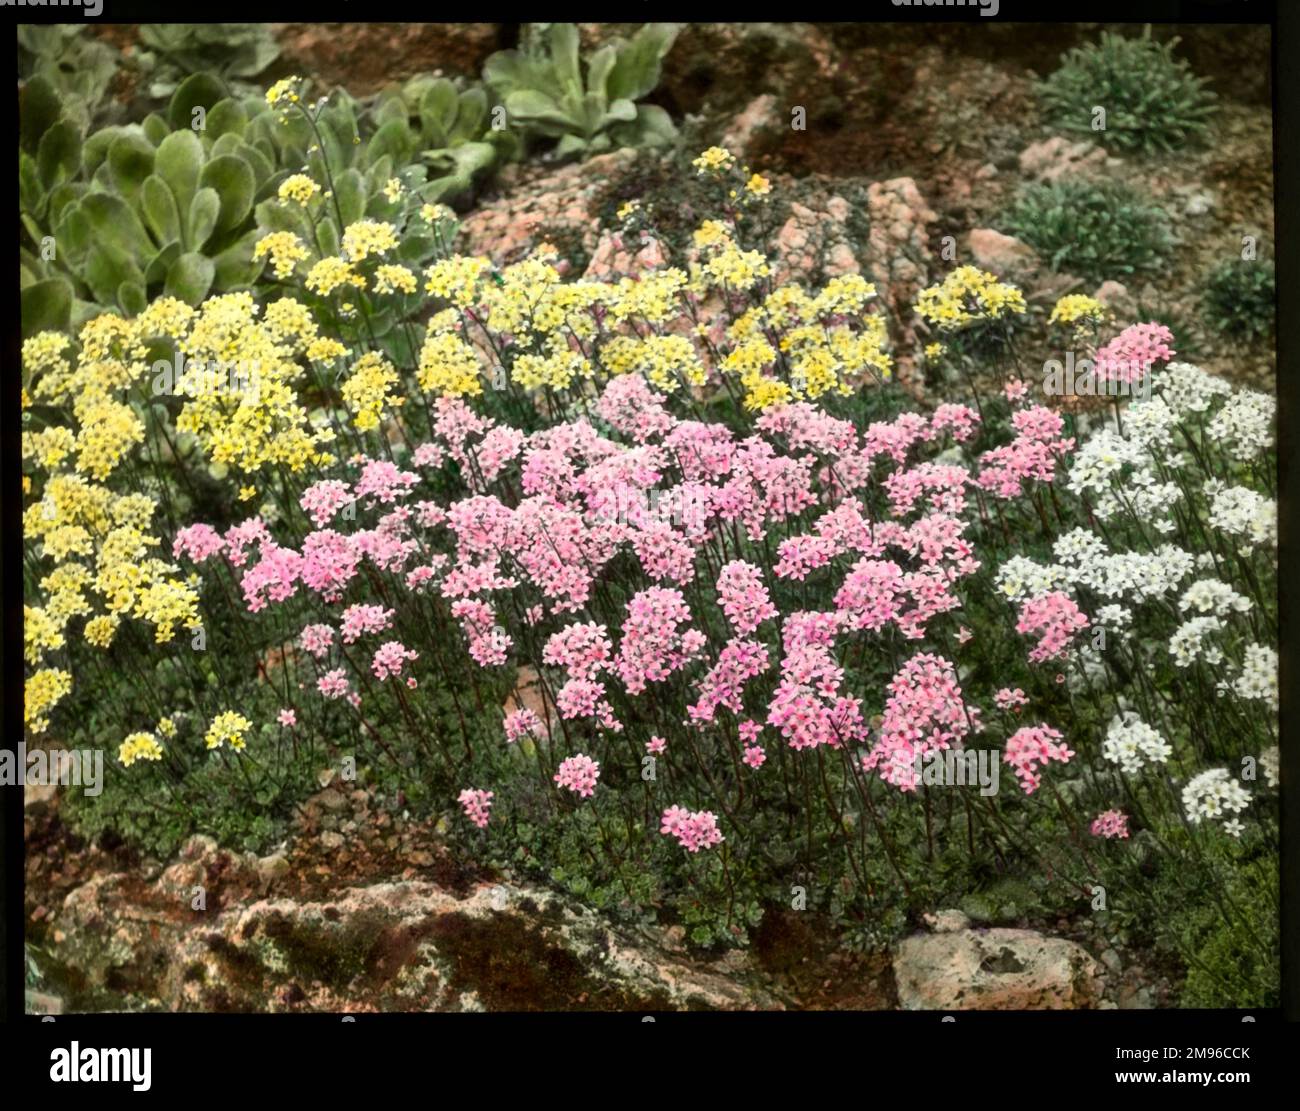 Saxifraga Aizoon (Livelong Saxifrage), a flowering plant of the Saxifragaceae family (commonly known as saxifrages or stone breakers because of their ability to grow in the cracks between rocks). Seen here growing in a rocky setting alongside Lutea and Rosea varieties. Stock Photo